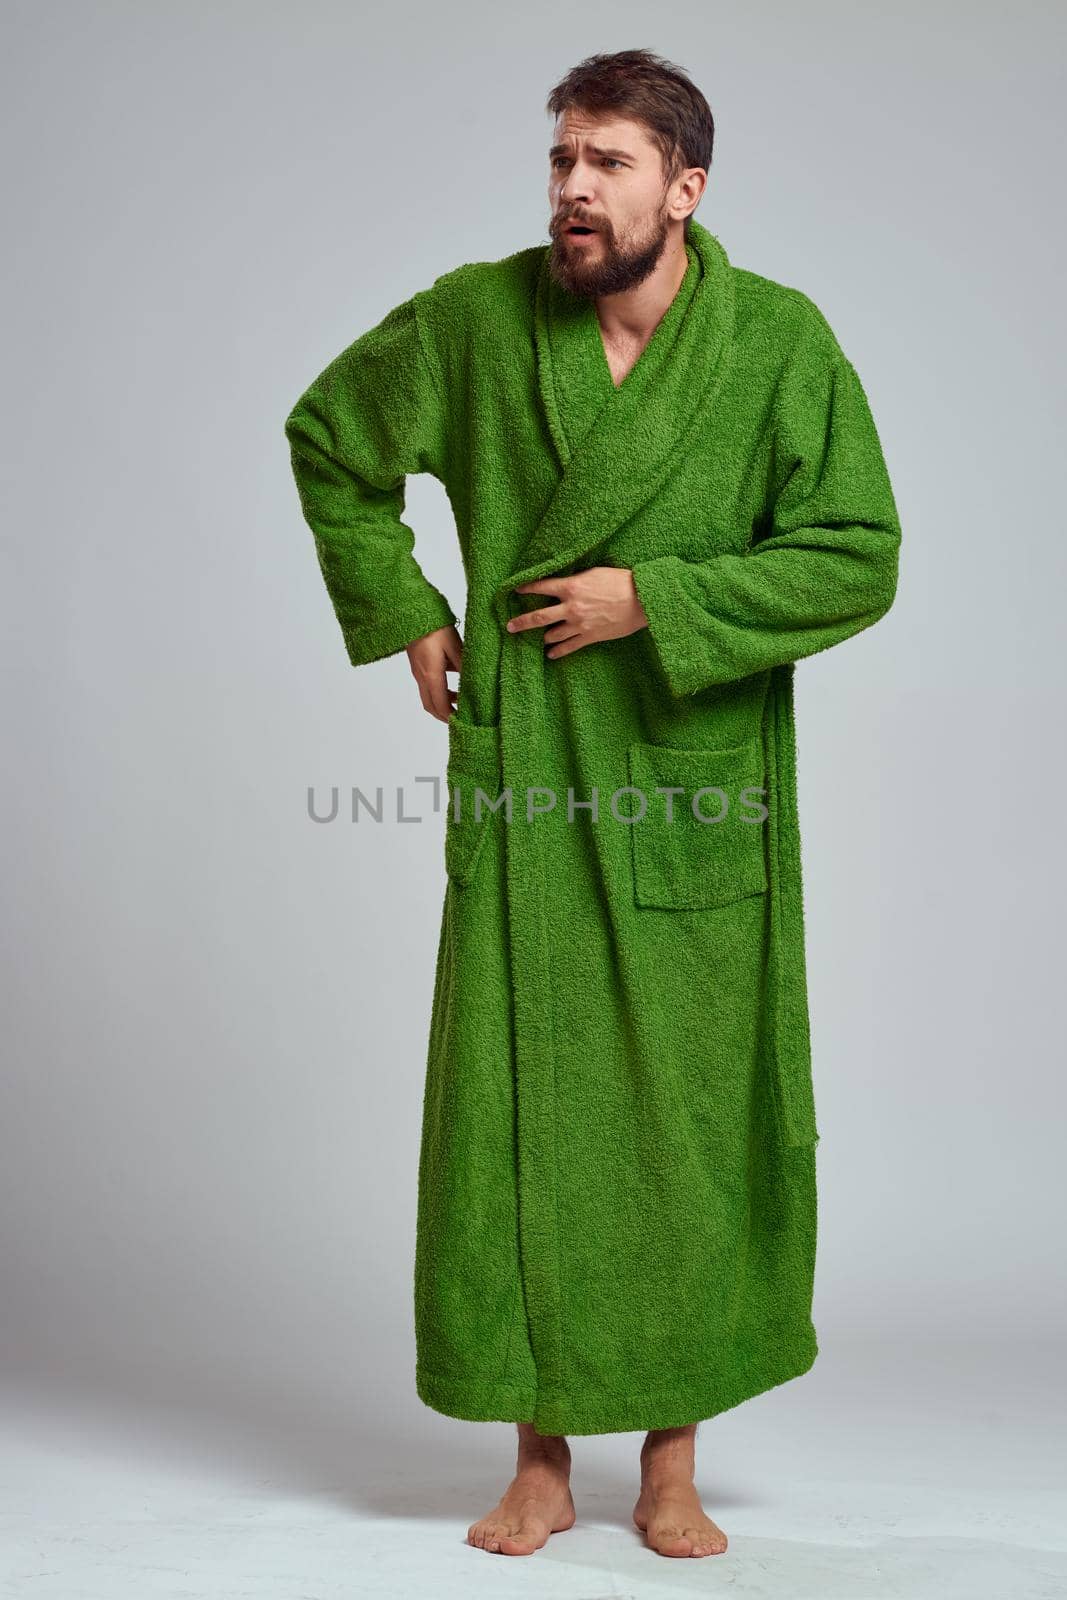 A bearded man in a green robe resting Comfort morning by SHOTPRIME